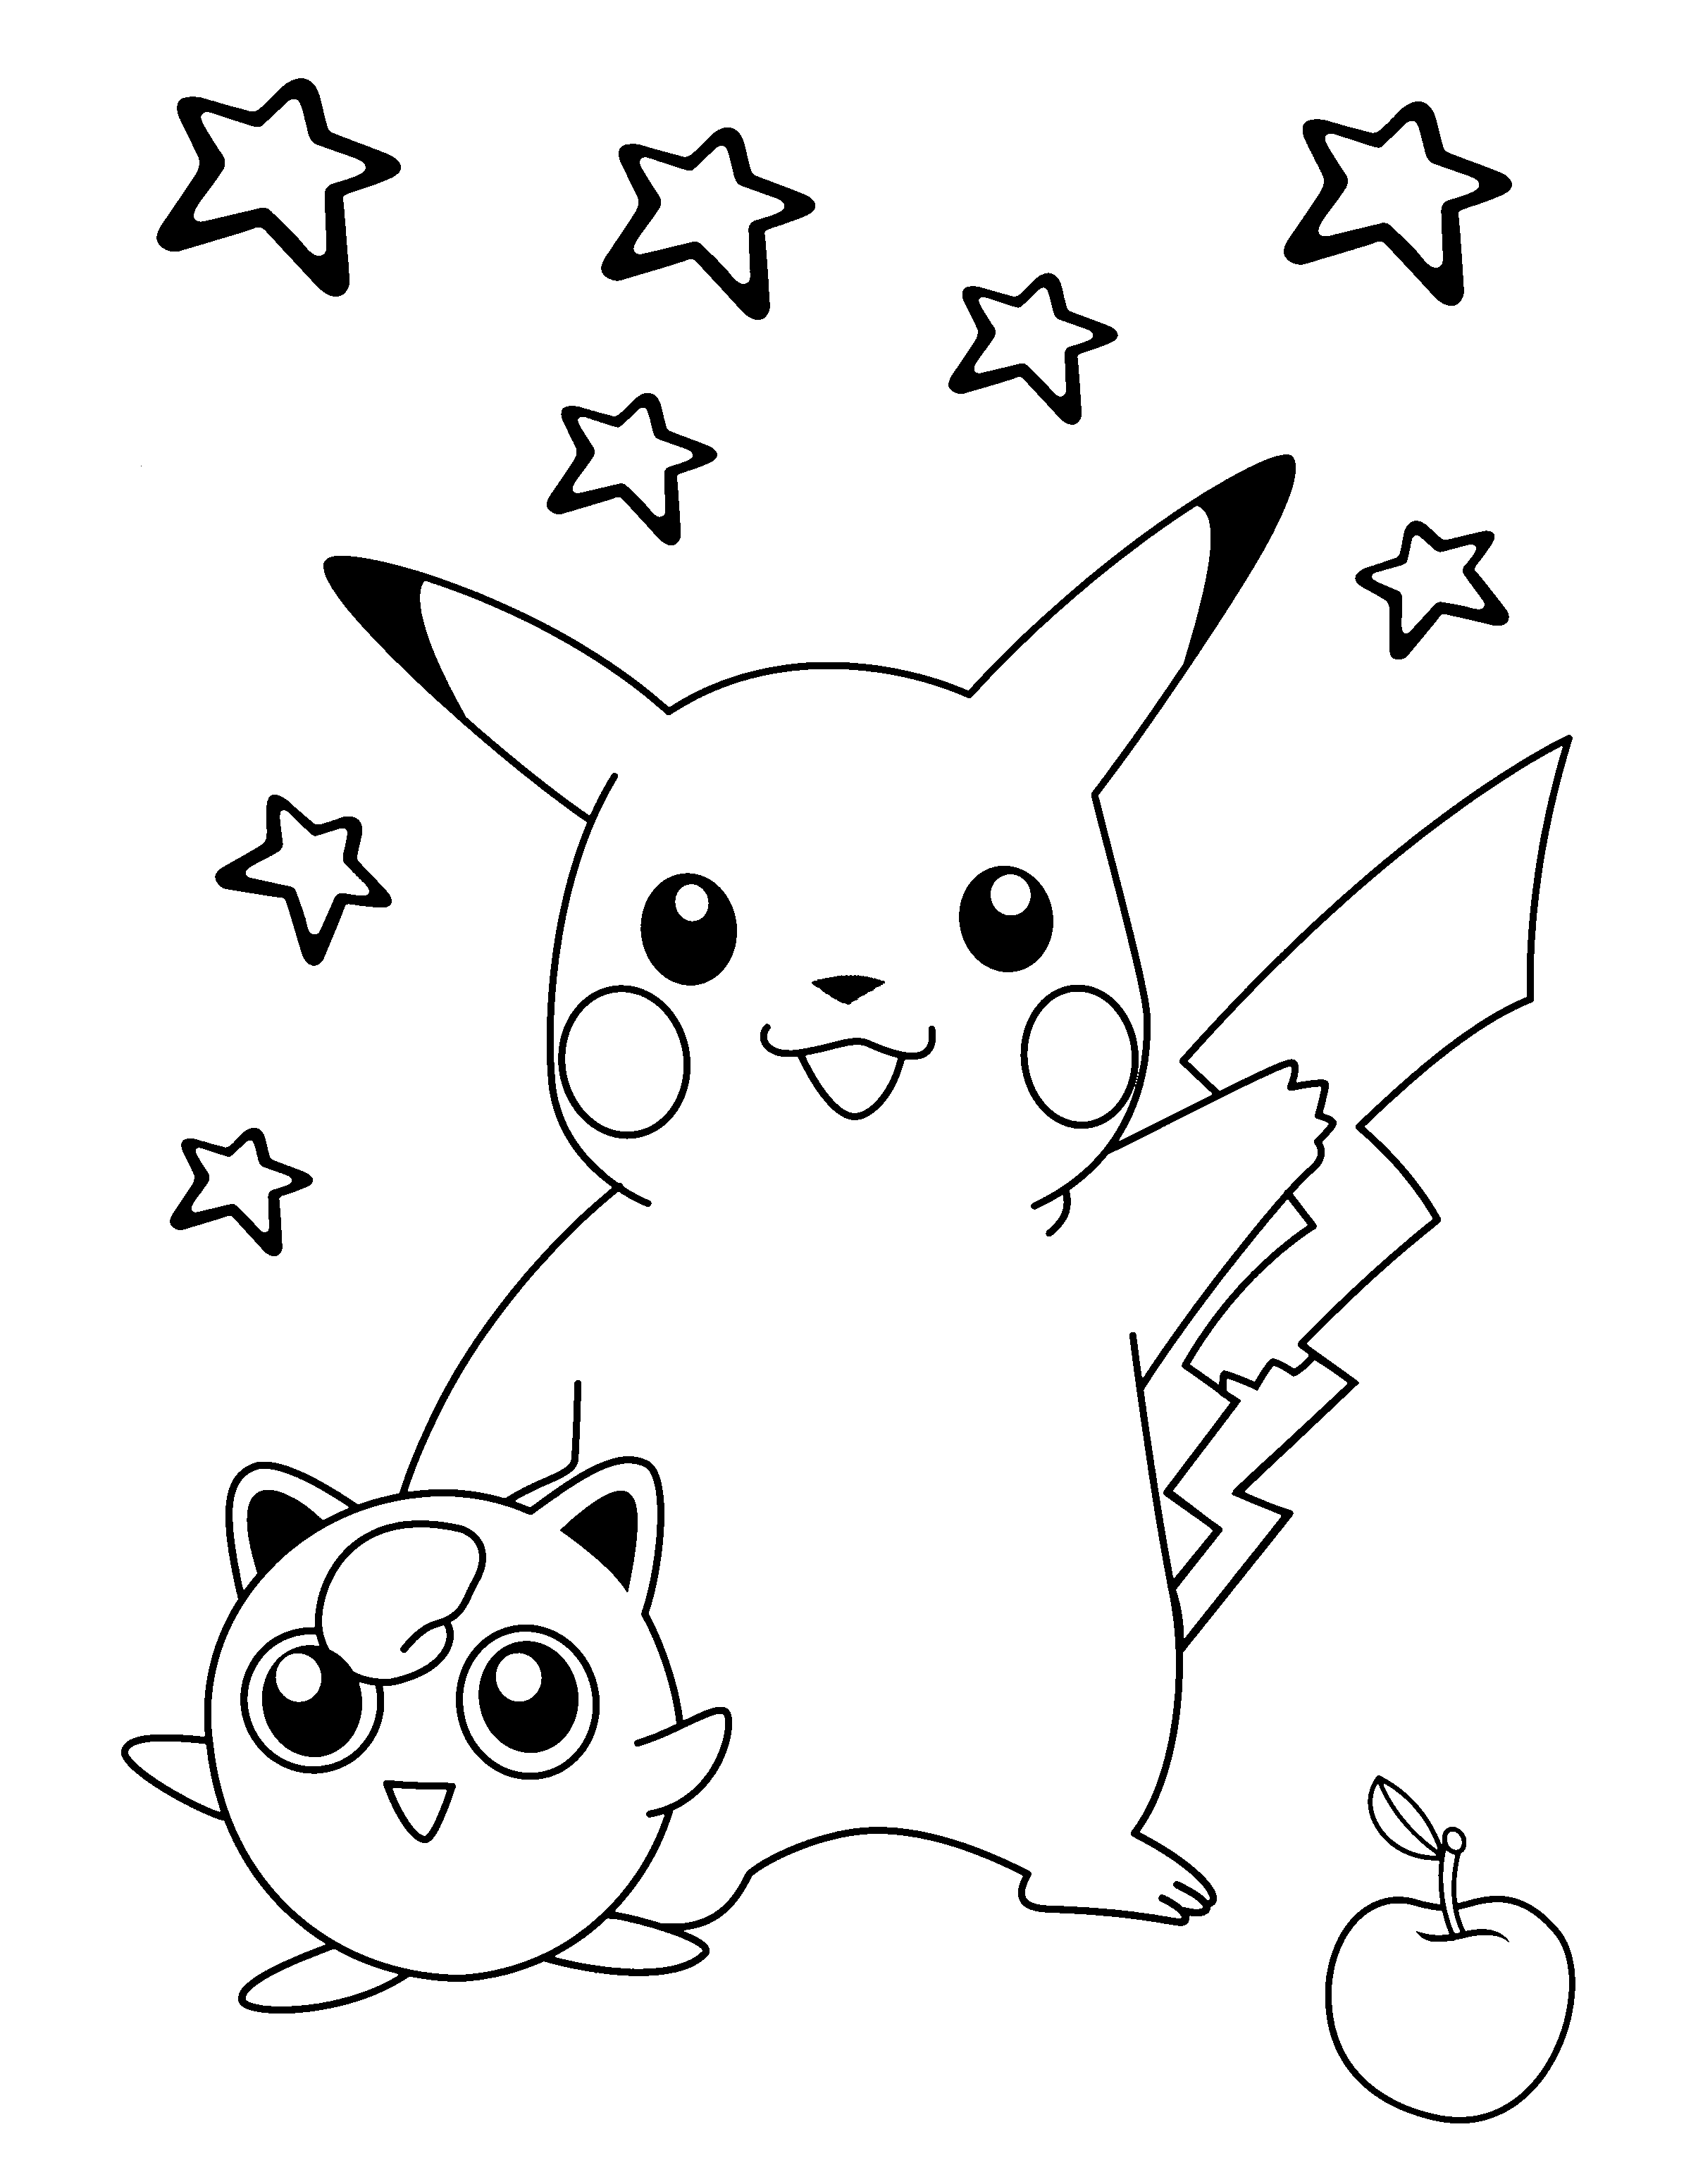 All Pokemon coloring pages Free printable Coloring pages for kids